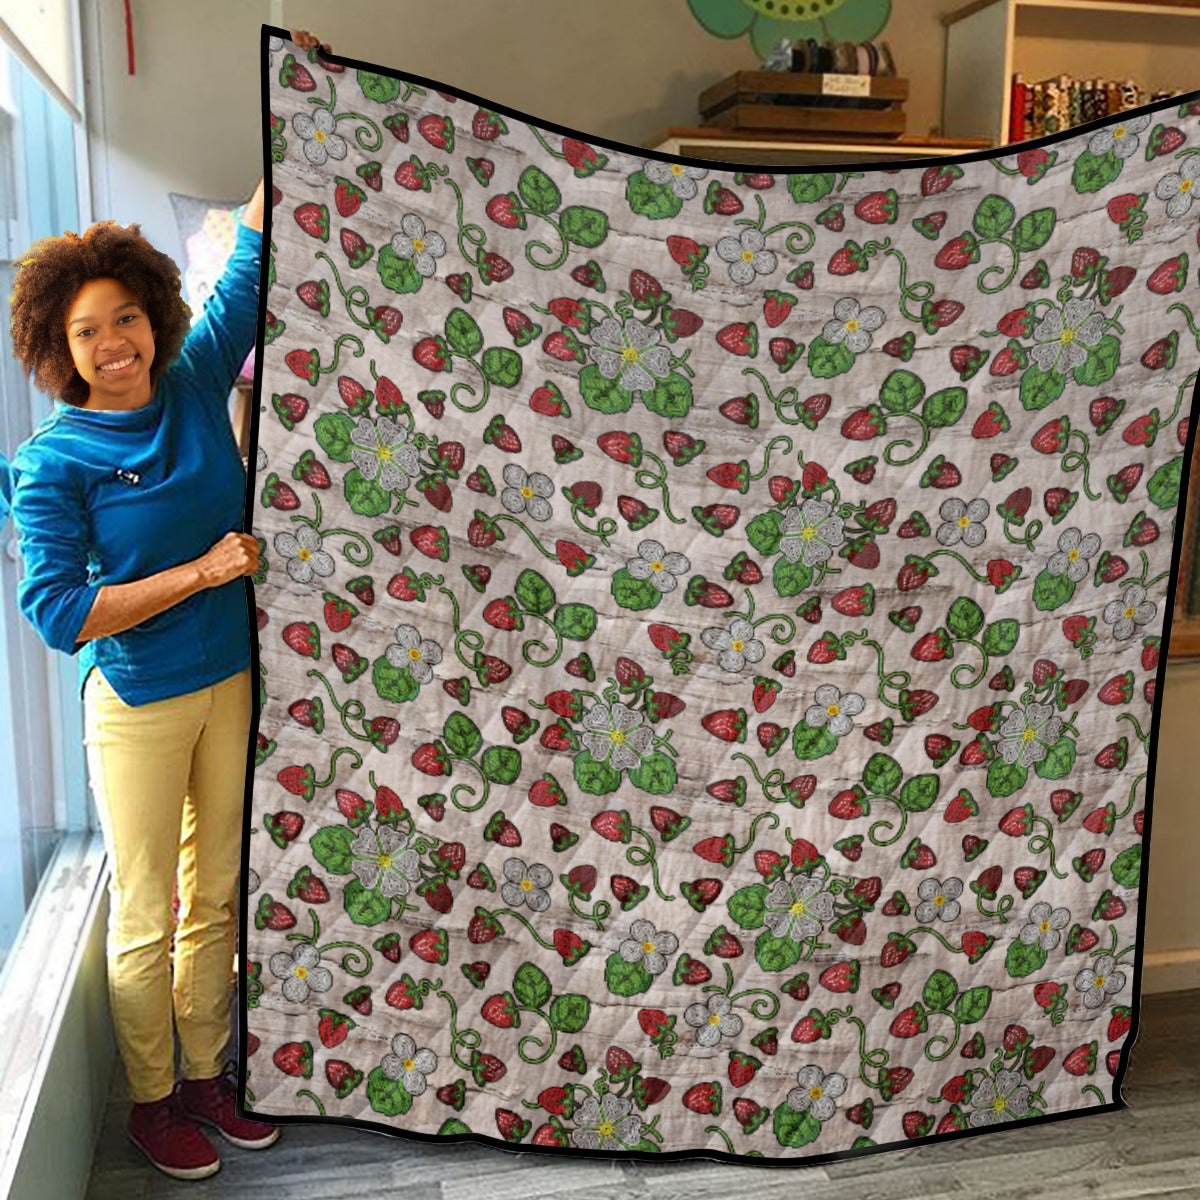 Strawberry Dreams Bright Birch Lightweight & Breathable Quilt With Edge-wrapping Strips